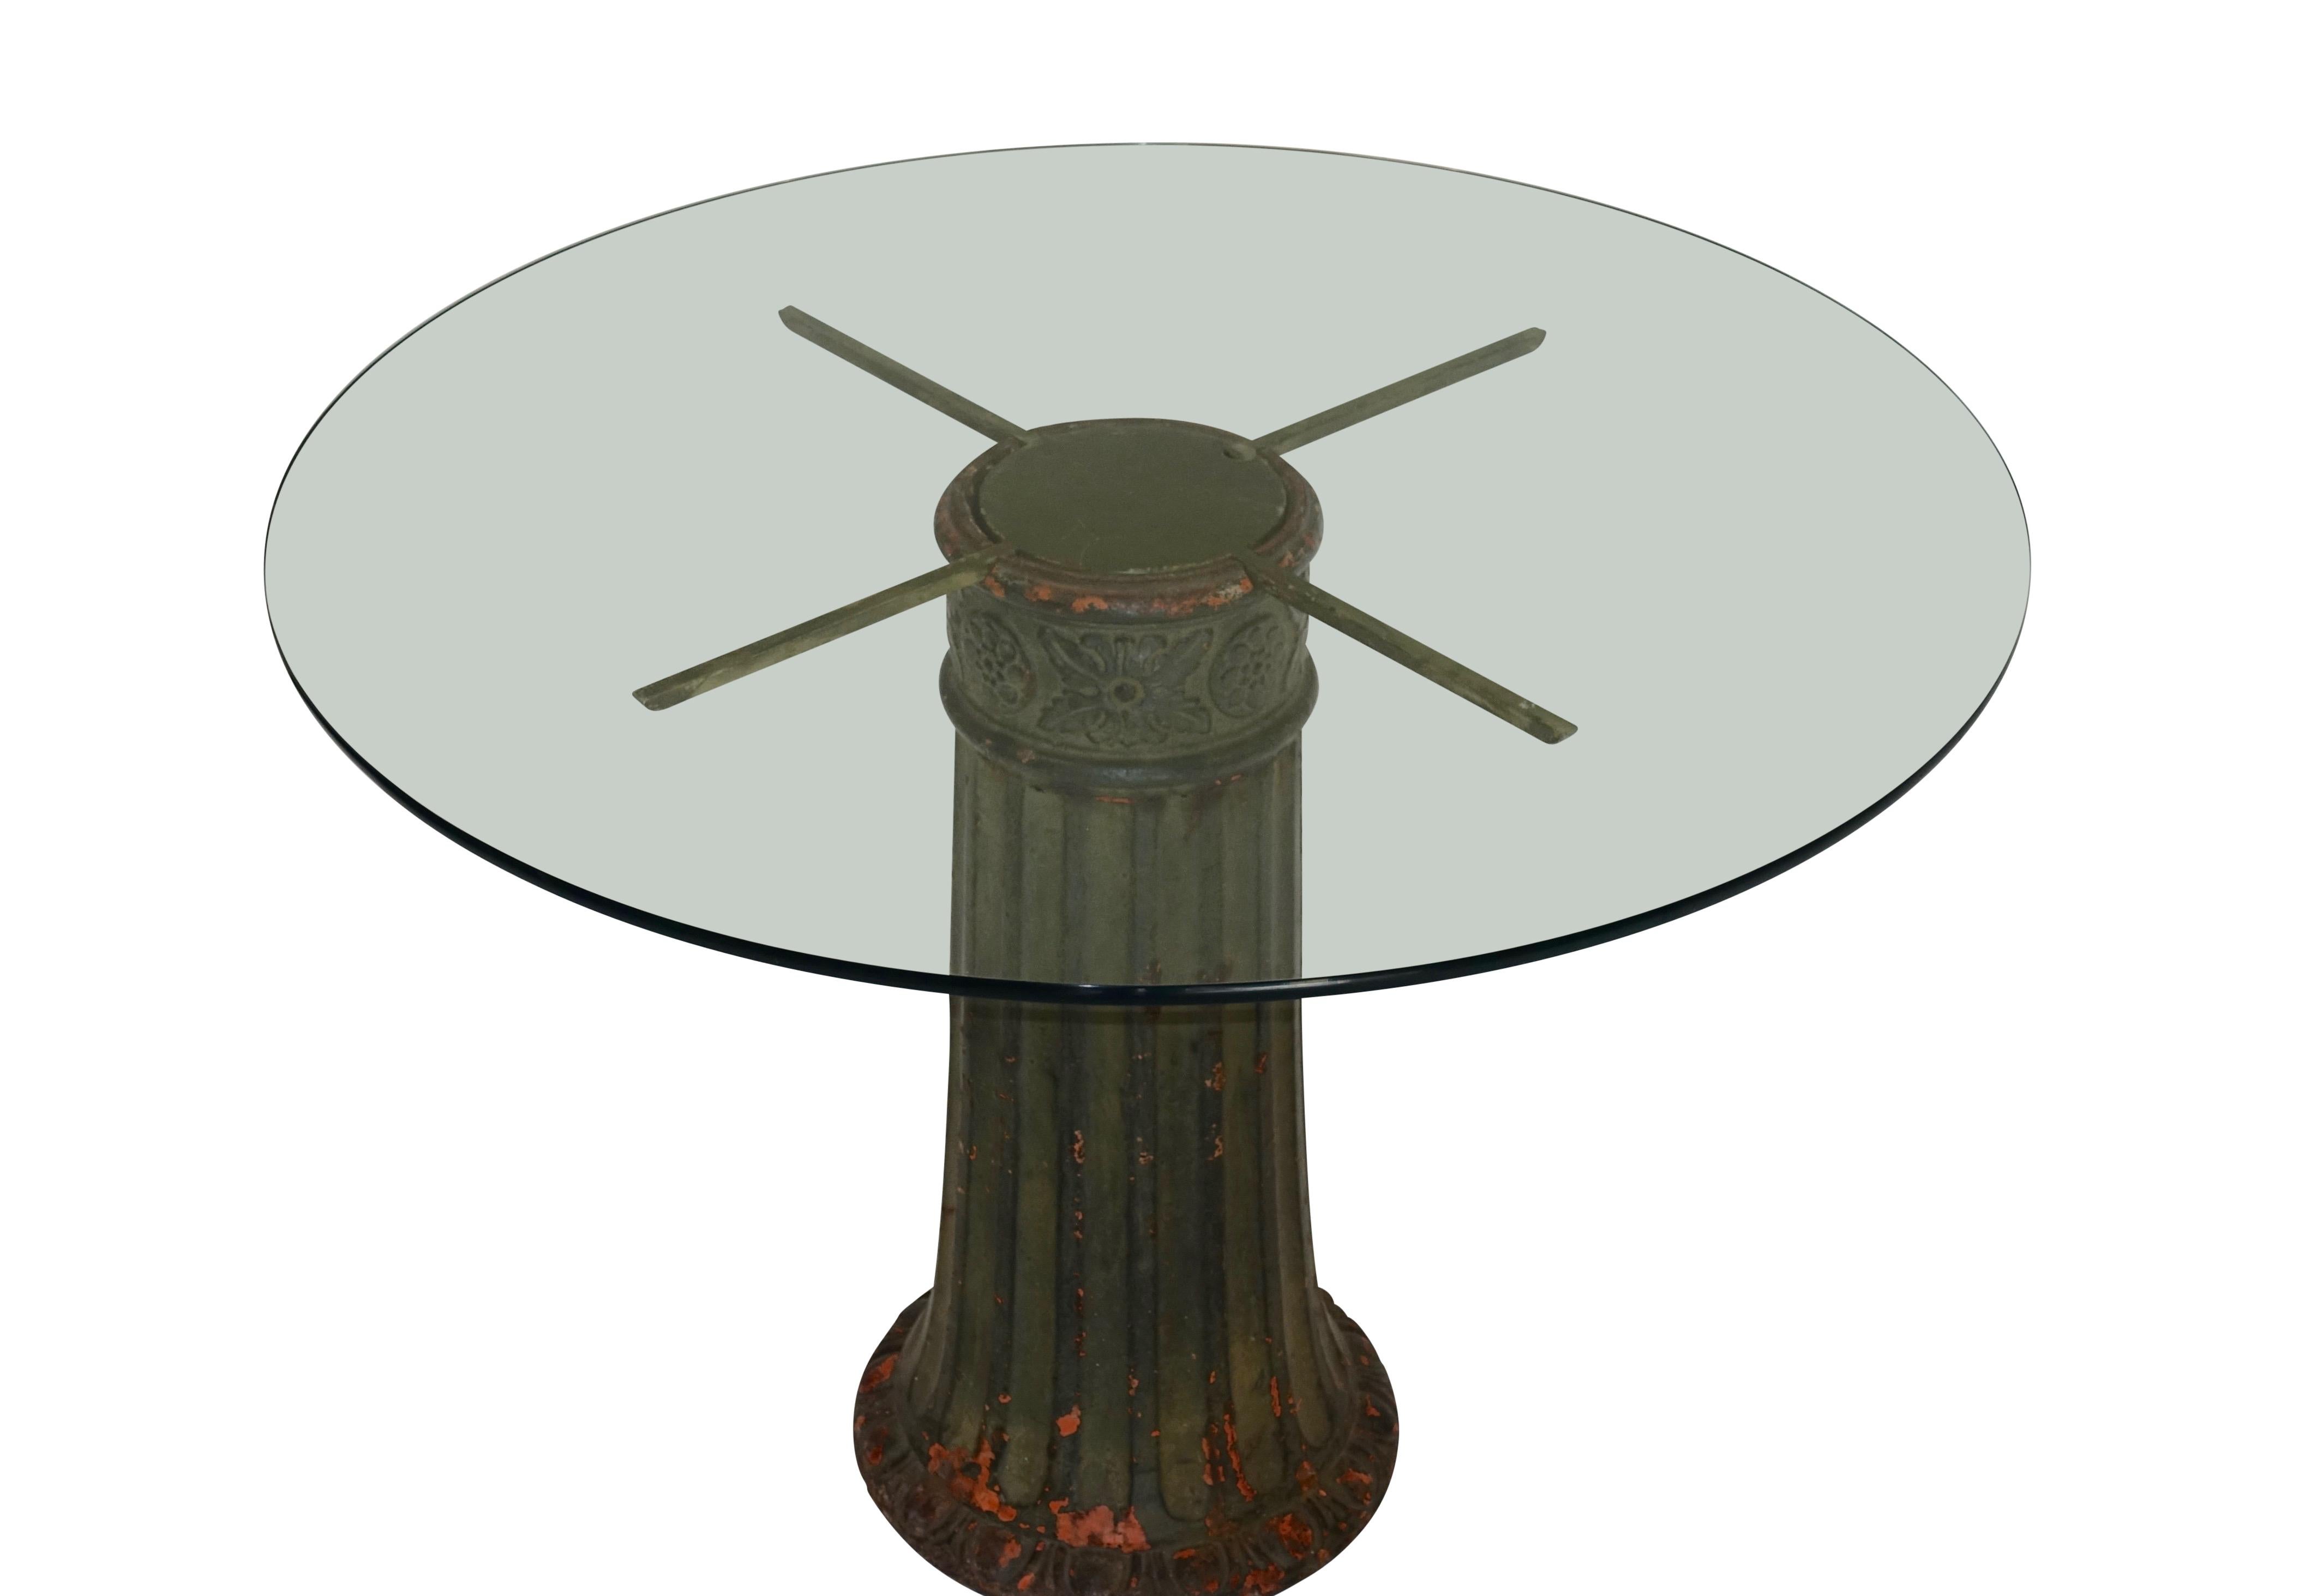 A late 19th-early 20th century San Francisco street light base with original verdigris painted finish converted to a dining or center table. Table comes with a bull nose edged 41 inch diameter glass top, but will accommodate up to a 52 inch